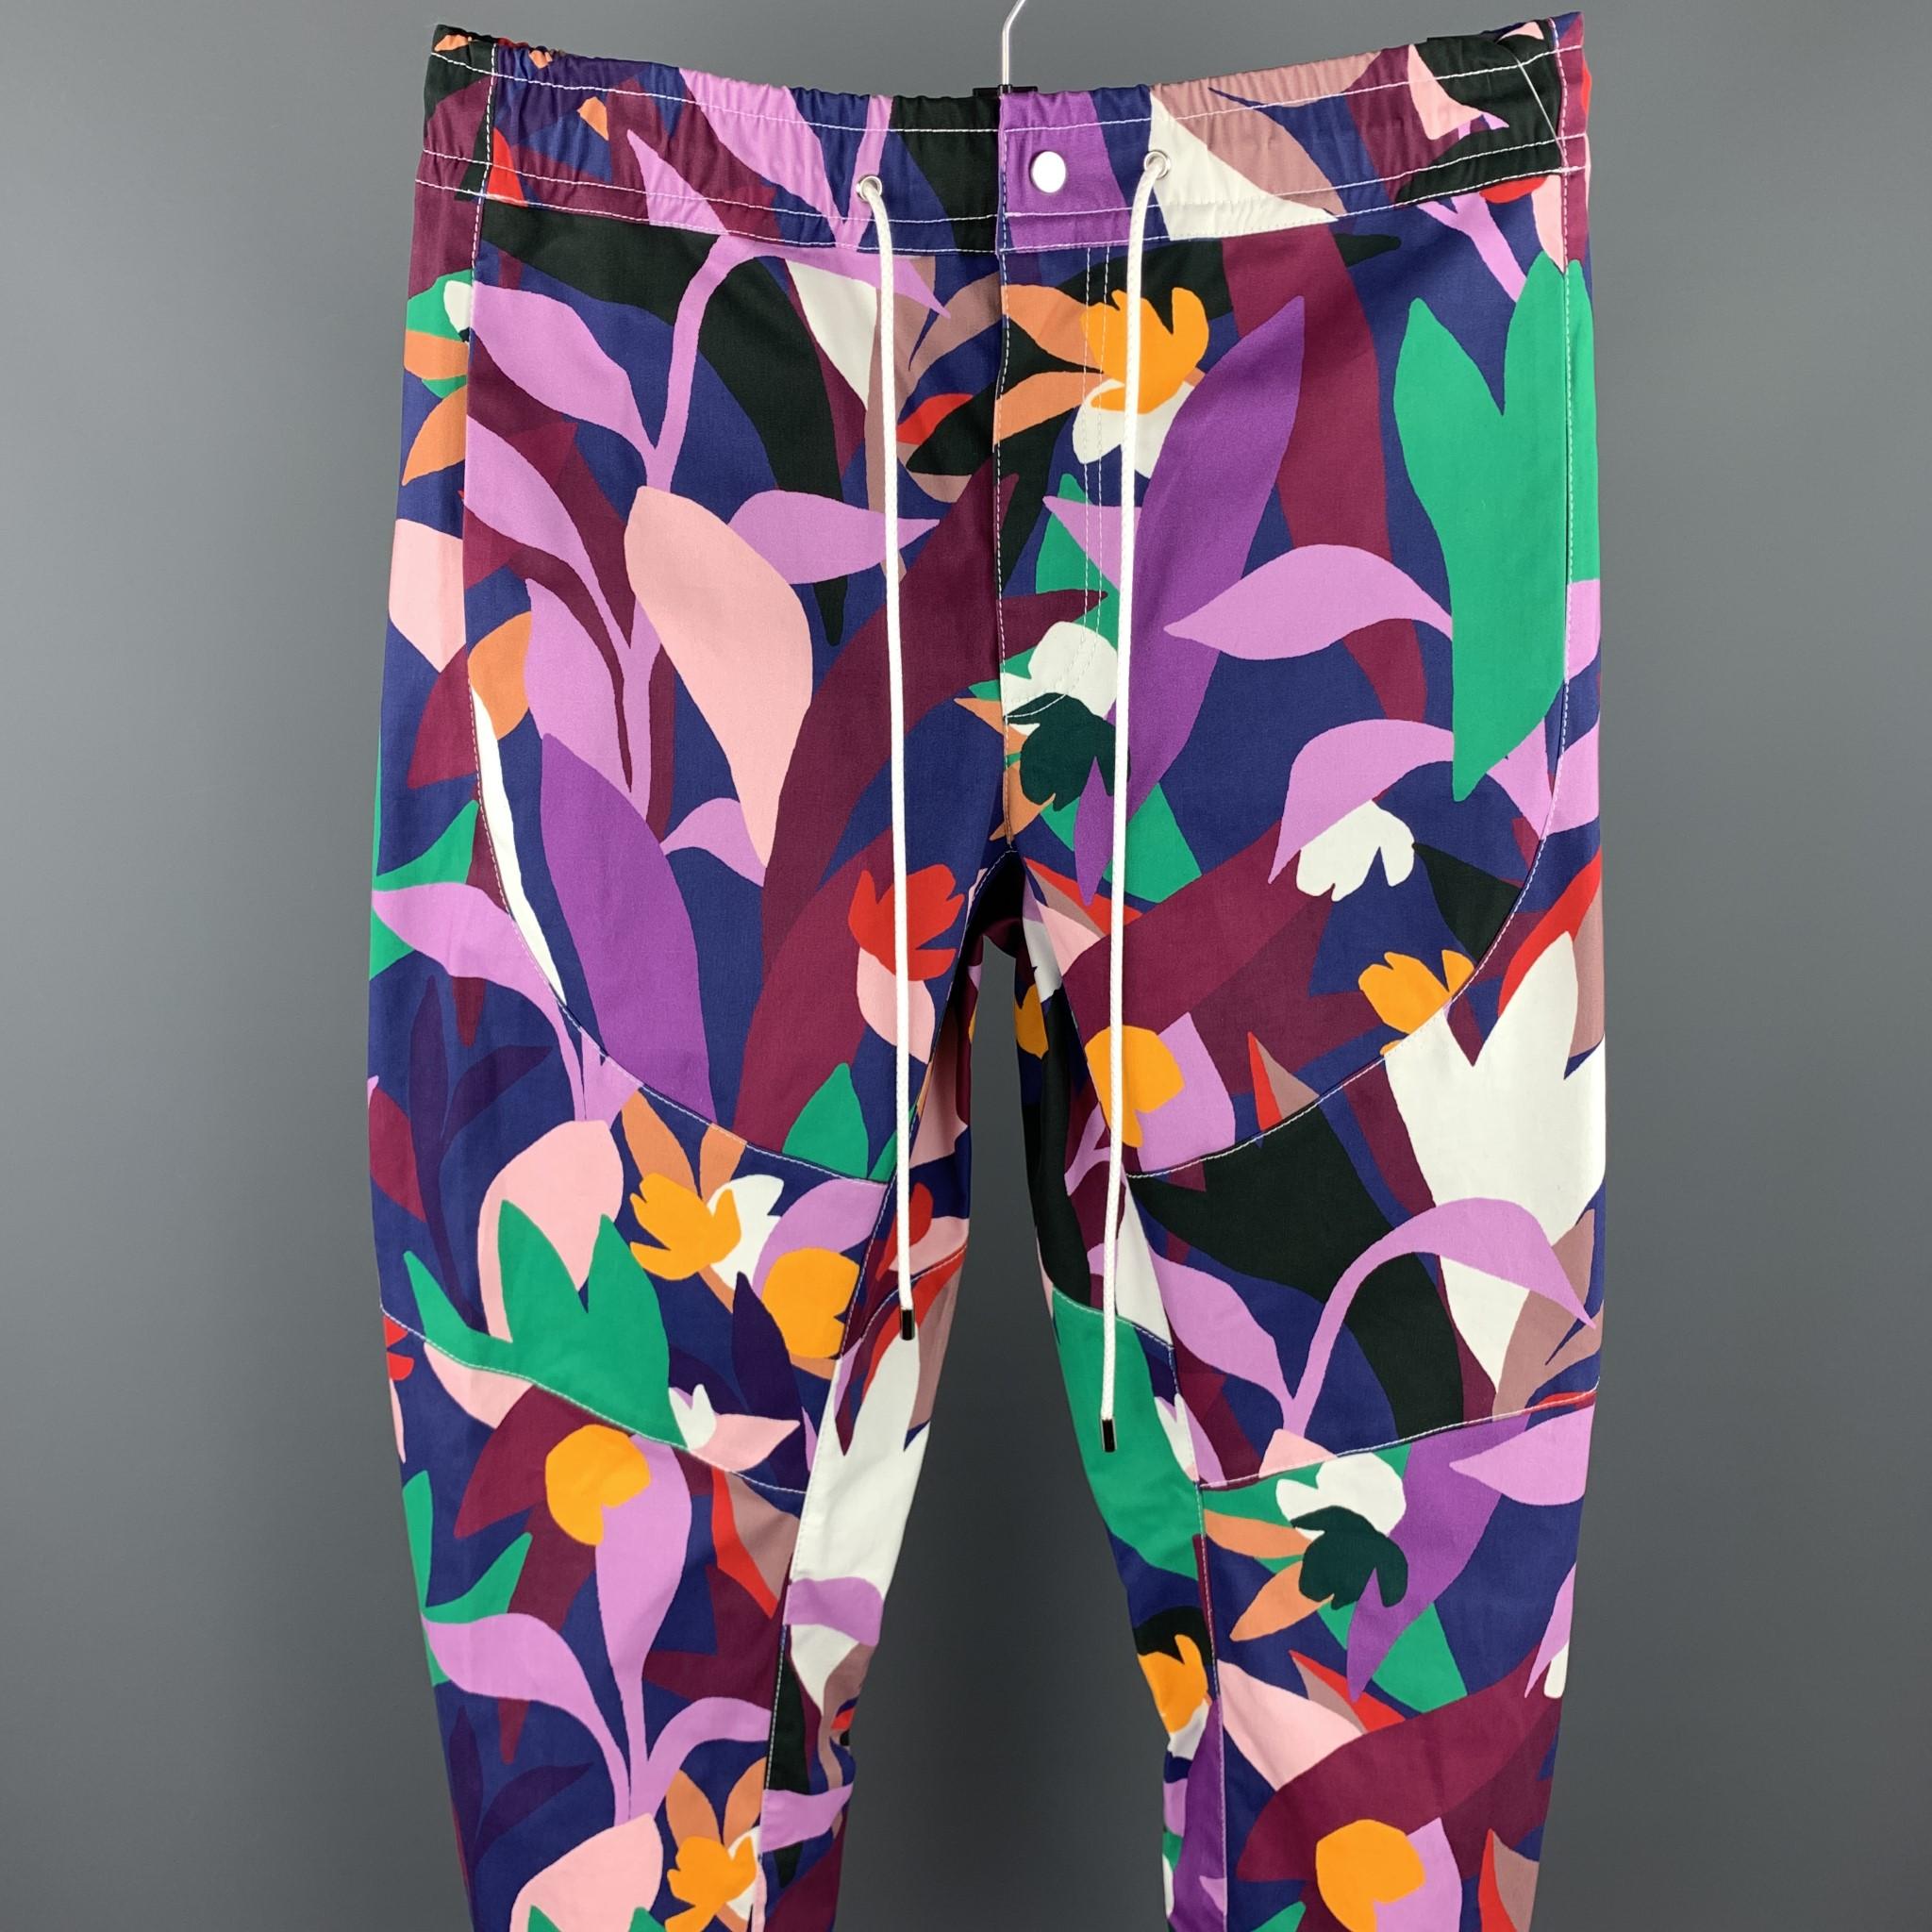 PRABAL GURUNG casual pants comes in a multi-color print cotton featuring a elastic waistband, drawstring, and a zip fly closure. Made in USA.

New With Tags. 
Marked: US 34

Measurements:

Waist: 34 in. 
Rise: 10 in. 
Inseam: 29 in. 
